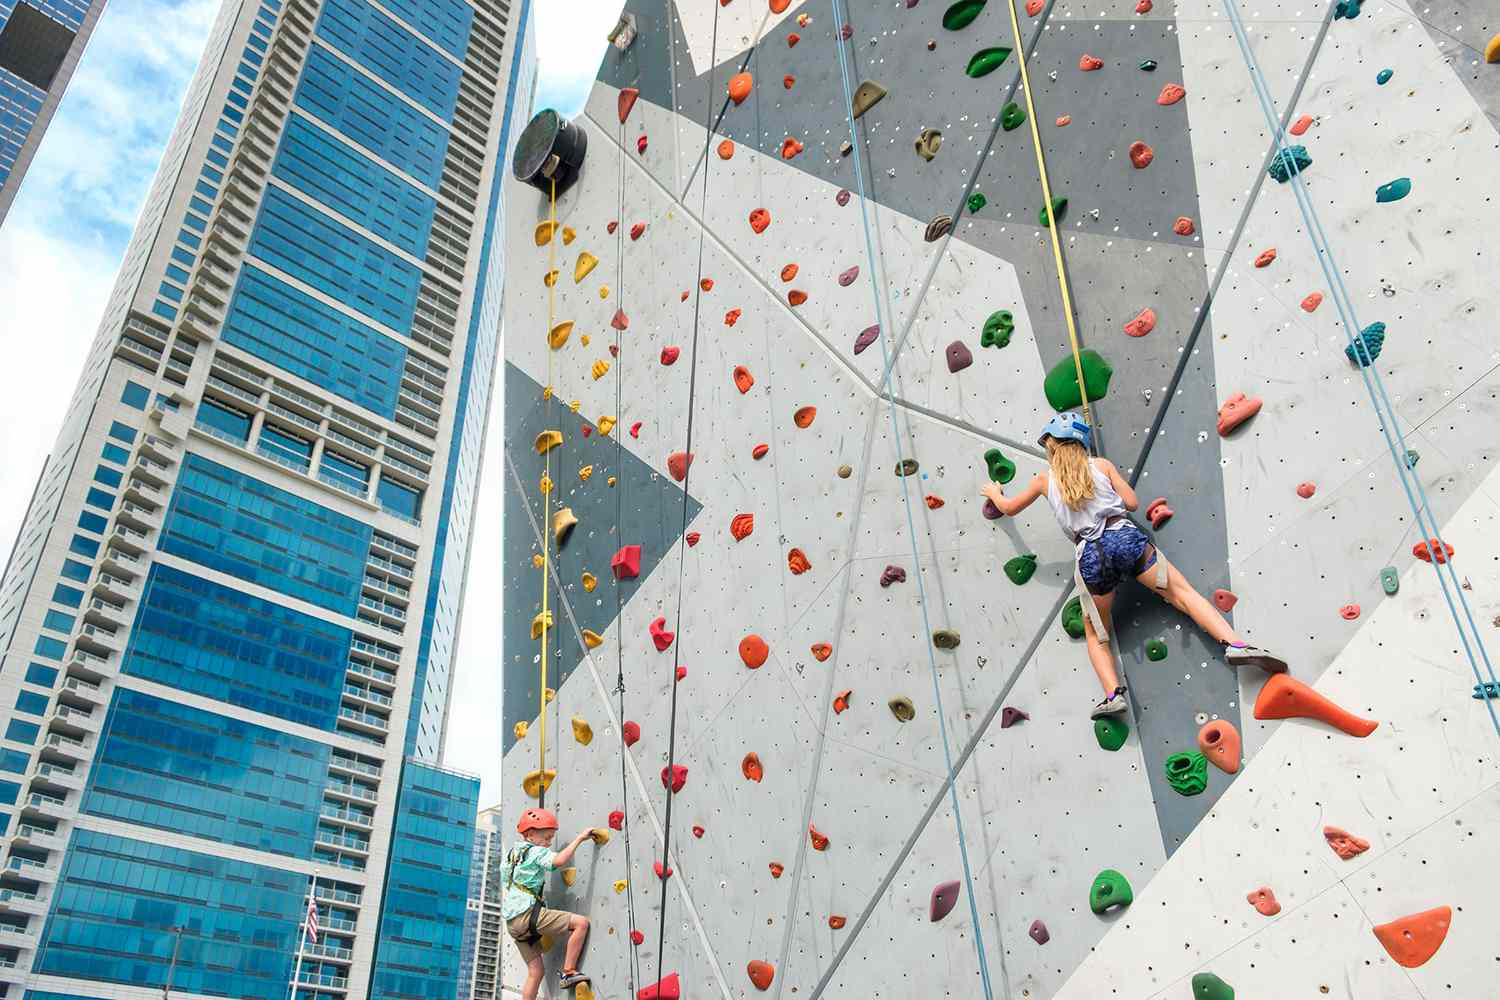 Climbing Wall at Maggie Daley Park, Chicago